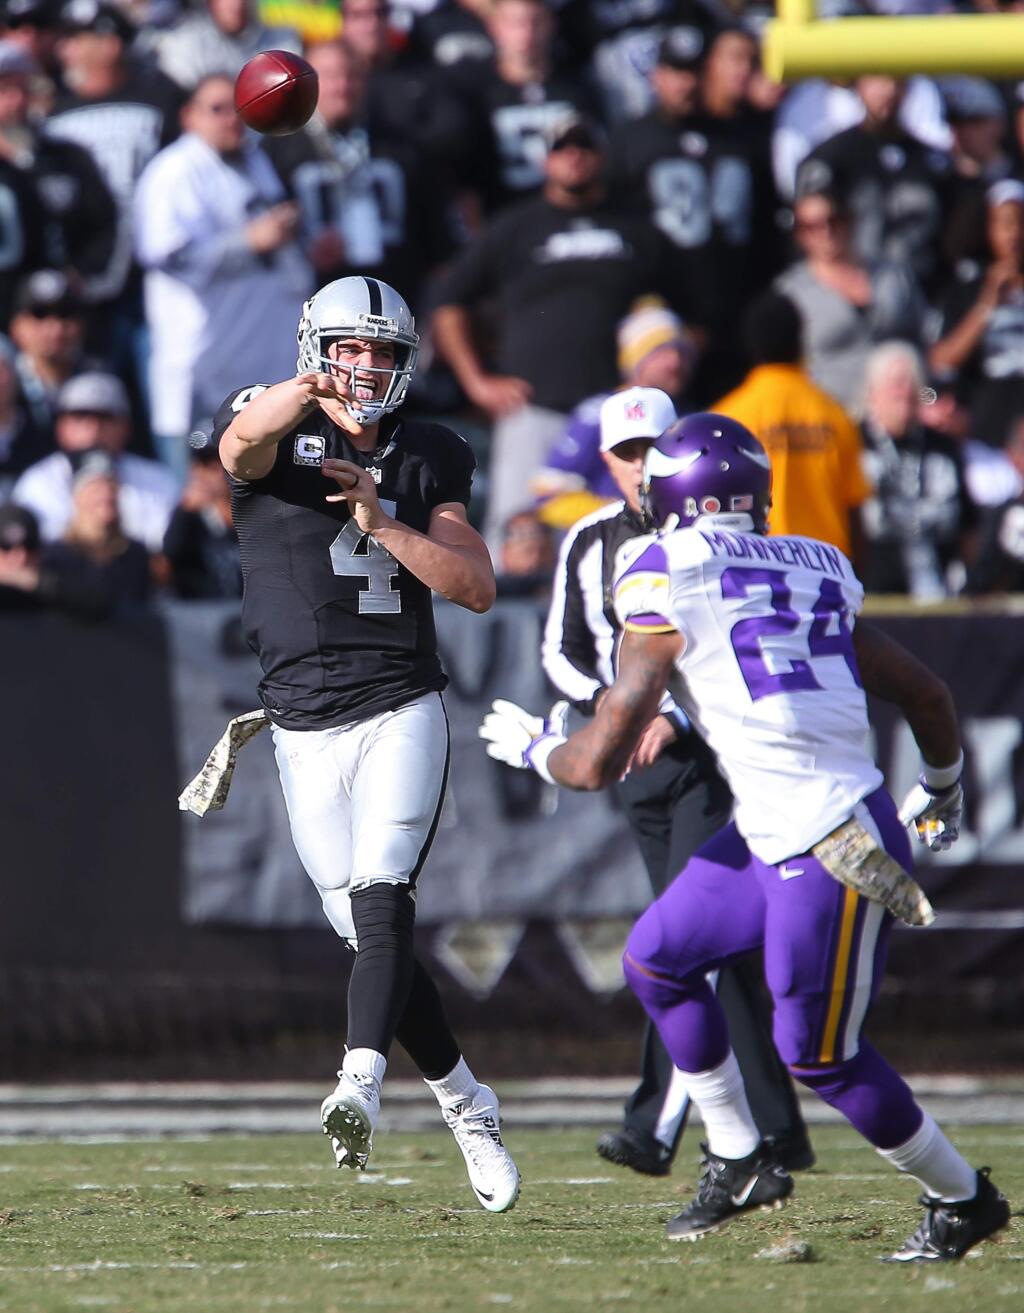 Oakland Raiders quarterback Derek Carr throws a pass against the Minnesota Vikings, during their game in Oakland on Sunday, November 15, 2015. The Vikings defeated the Raiders 30-14.(Christopher Chung/ The Press Democrat)